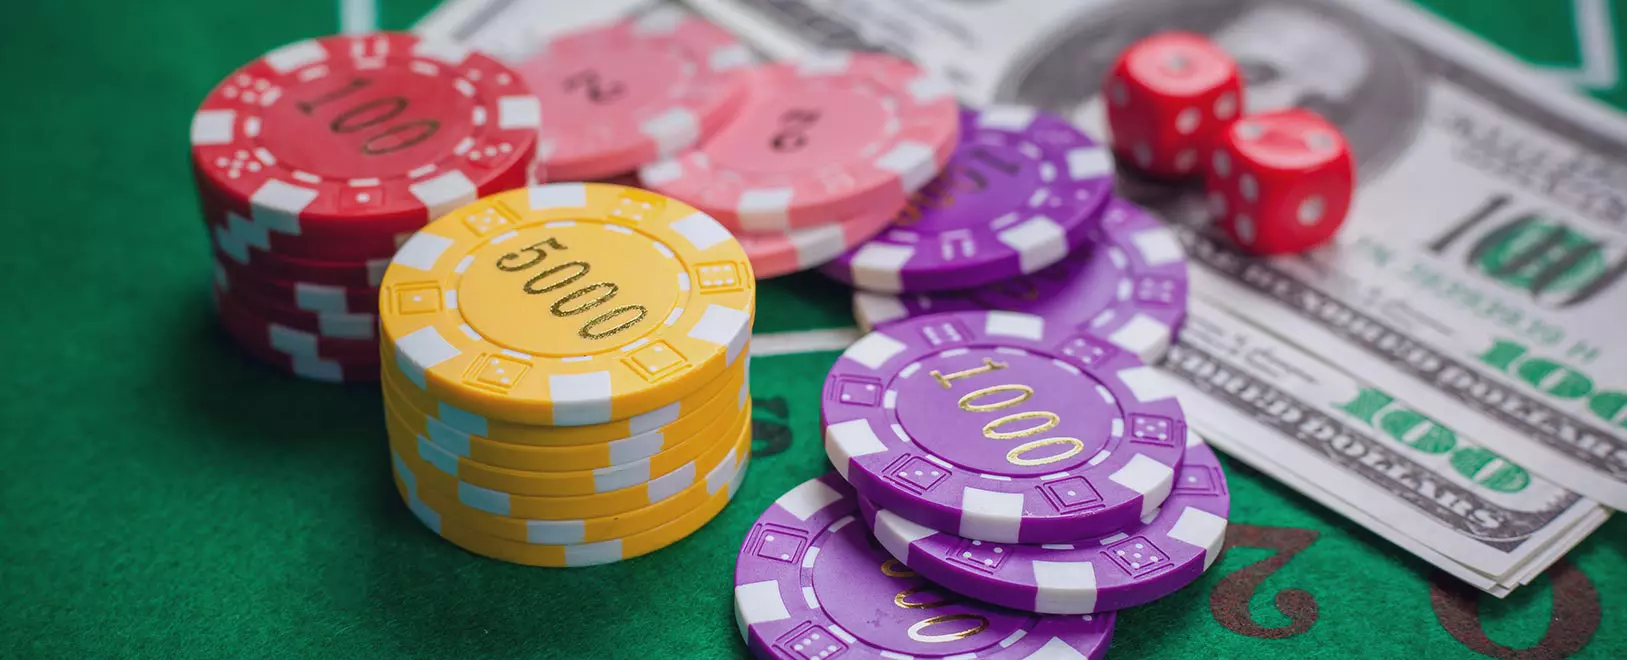 Online Poker Promotions and Bonuses at Bovada